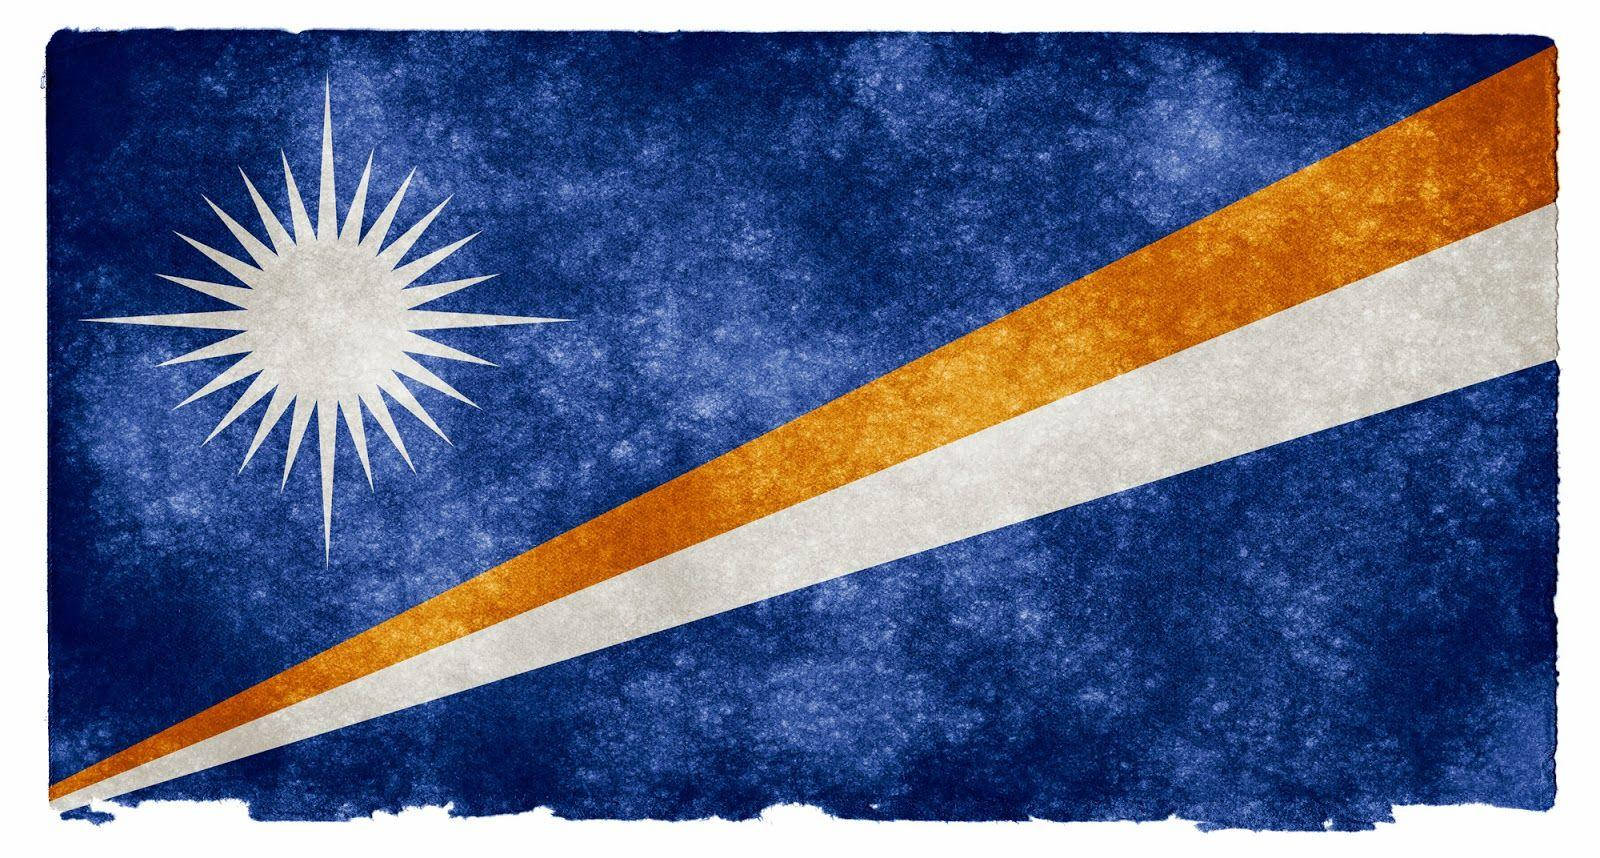 Caption: Strong Pride of the Marshall Islands - A Tattered Flag Wallpaper